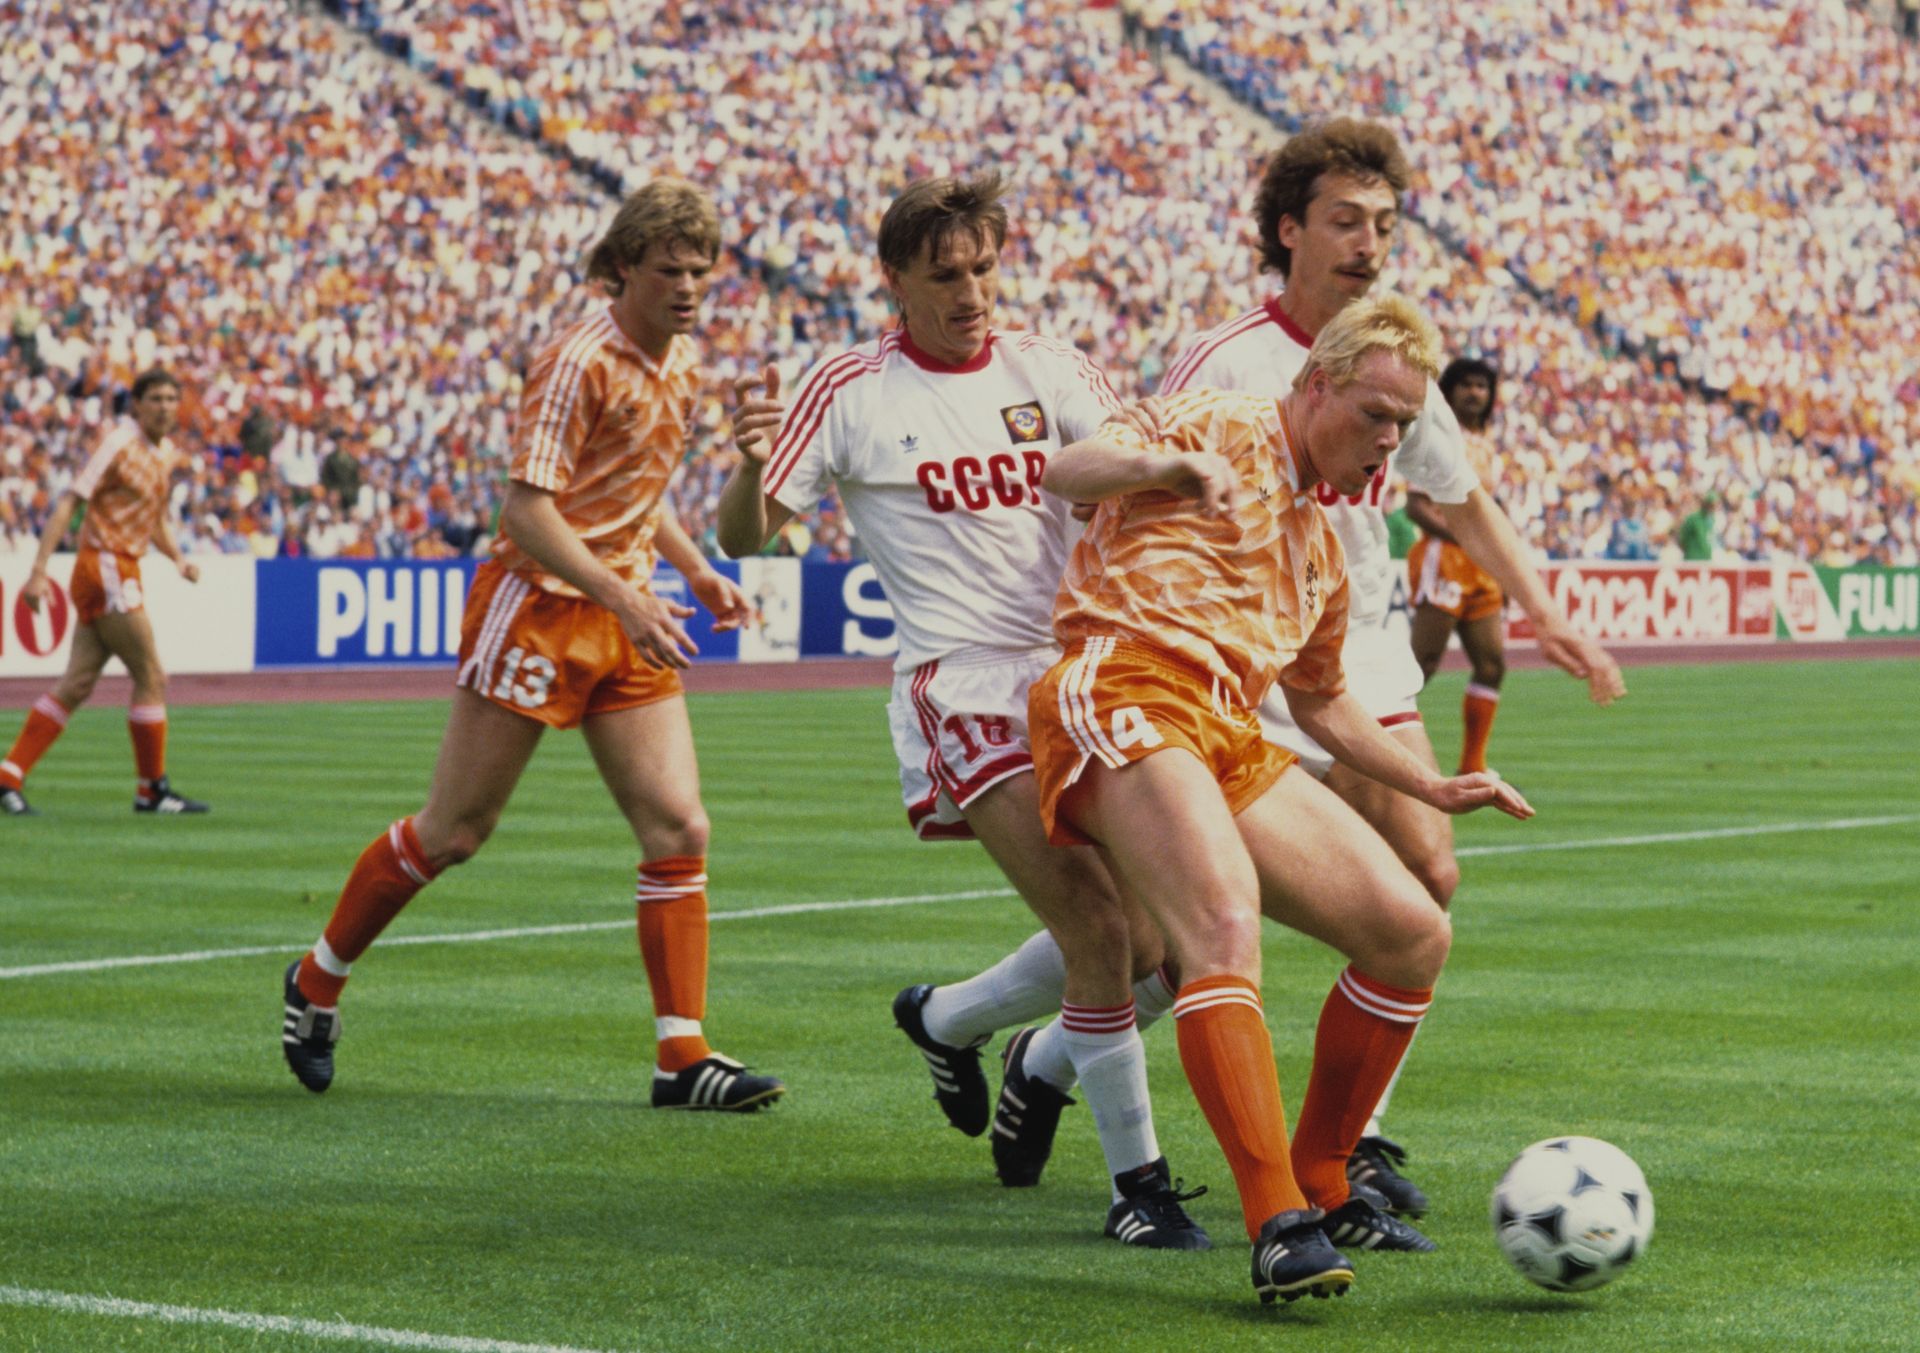 <p>                     Ronald Koeman and Erwin Koeman both featured as starters in the Netherlands side which won Euro 88 – the first ever international trophy for the Dutch.                   </p>                                      <p>                     Sweeper Ronald was much more successful, winning European Cups at PSV Eindhoven and Barcelona – and earning 78 caps in total. Erwin, a midfielder who was capped 31 times, won two Dutch titles at PSV and a European Cup Winners' Cup at Belgian club Mechelen.                   </p>